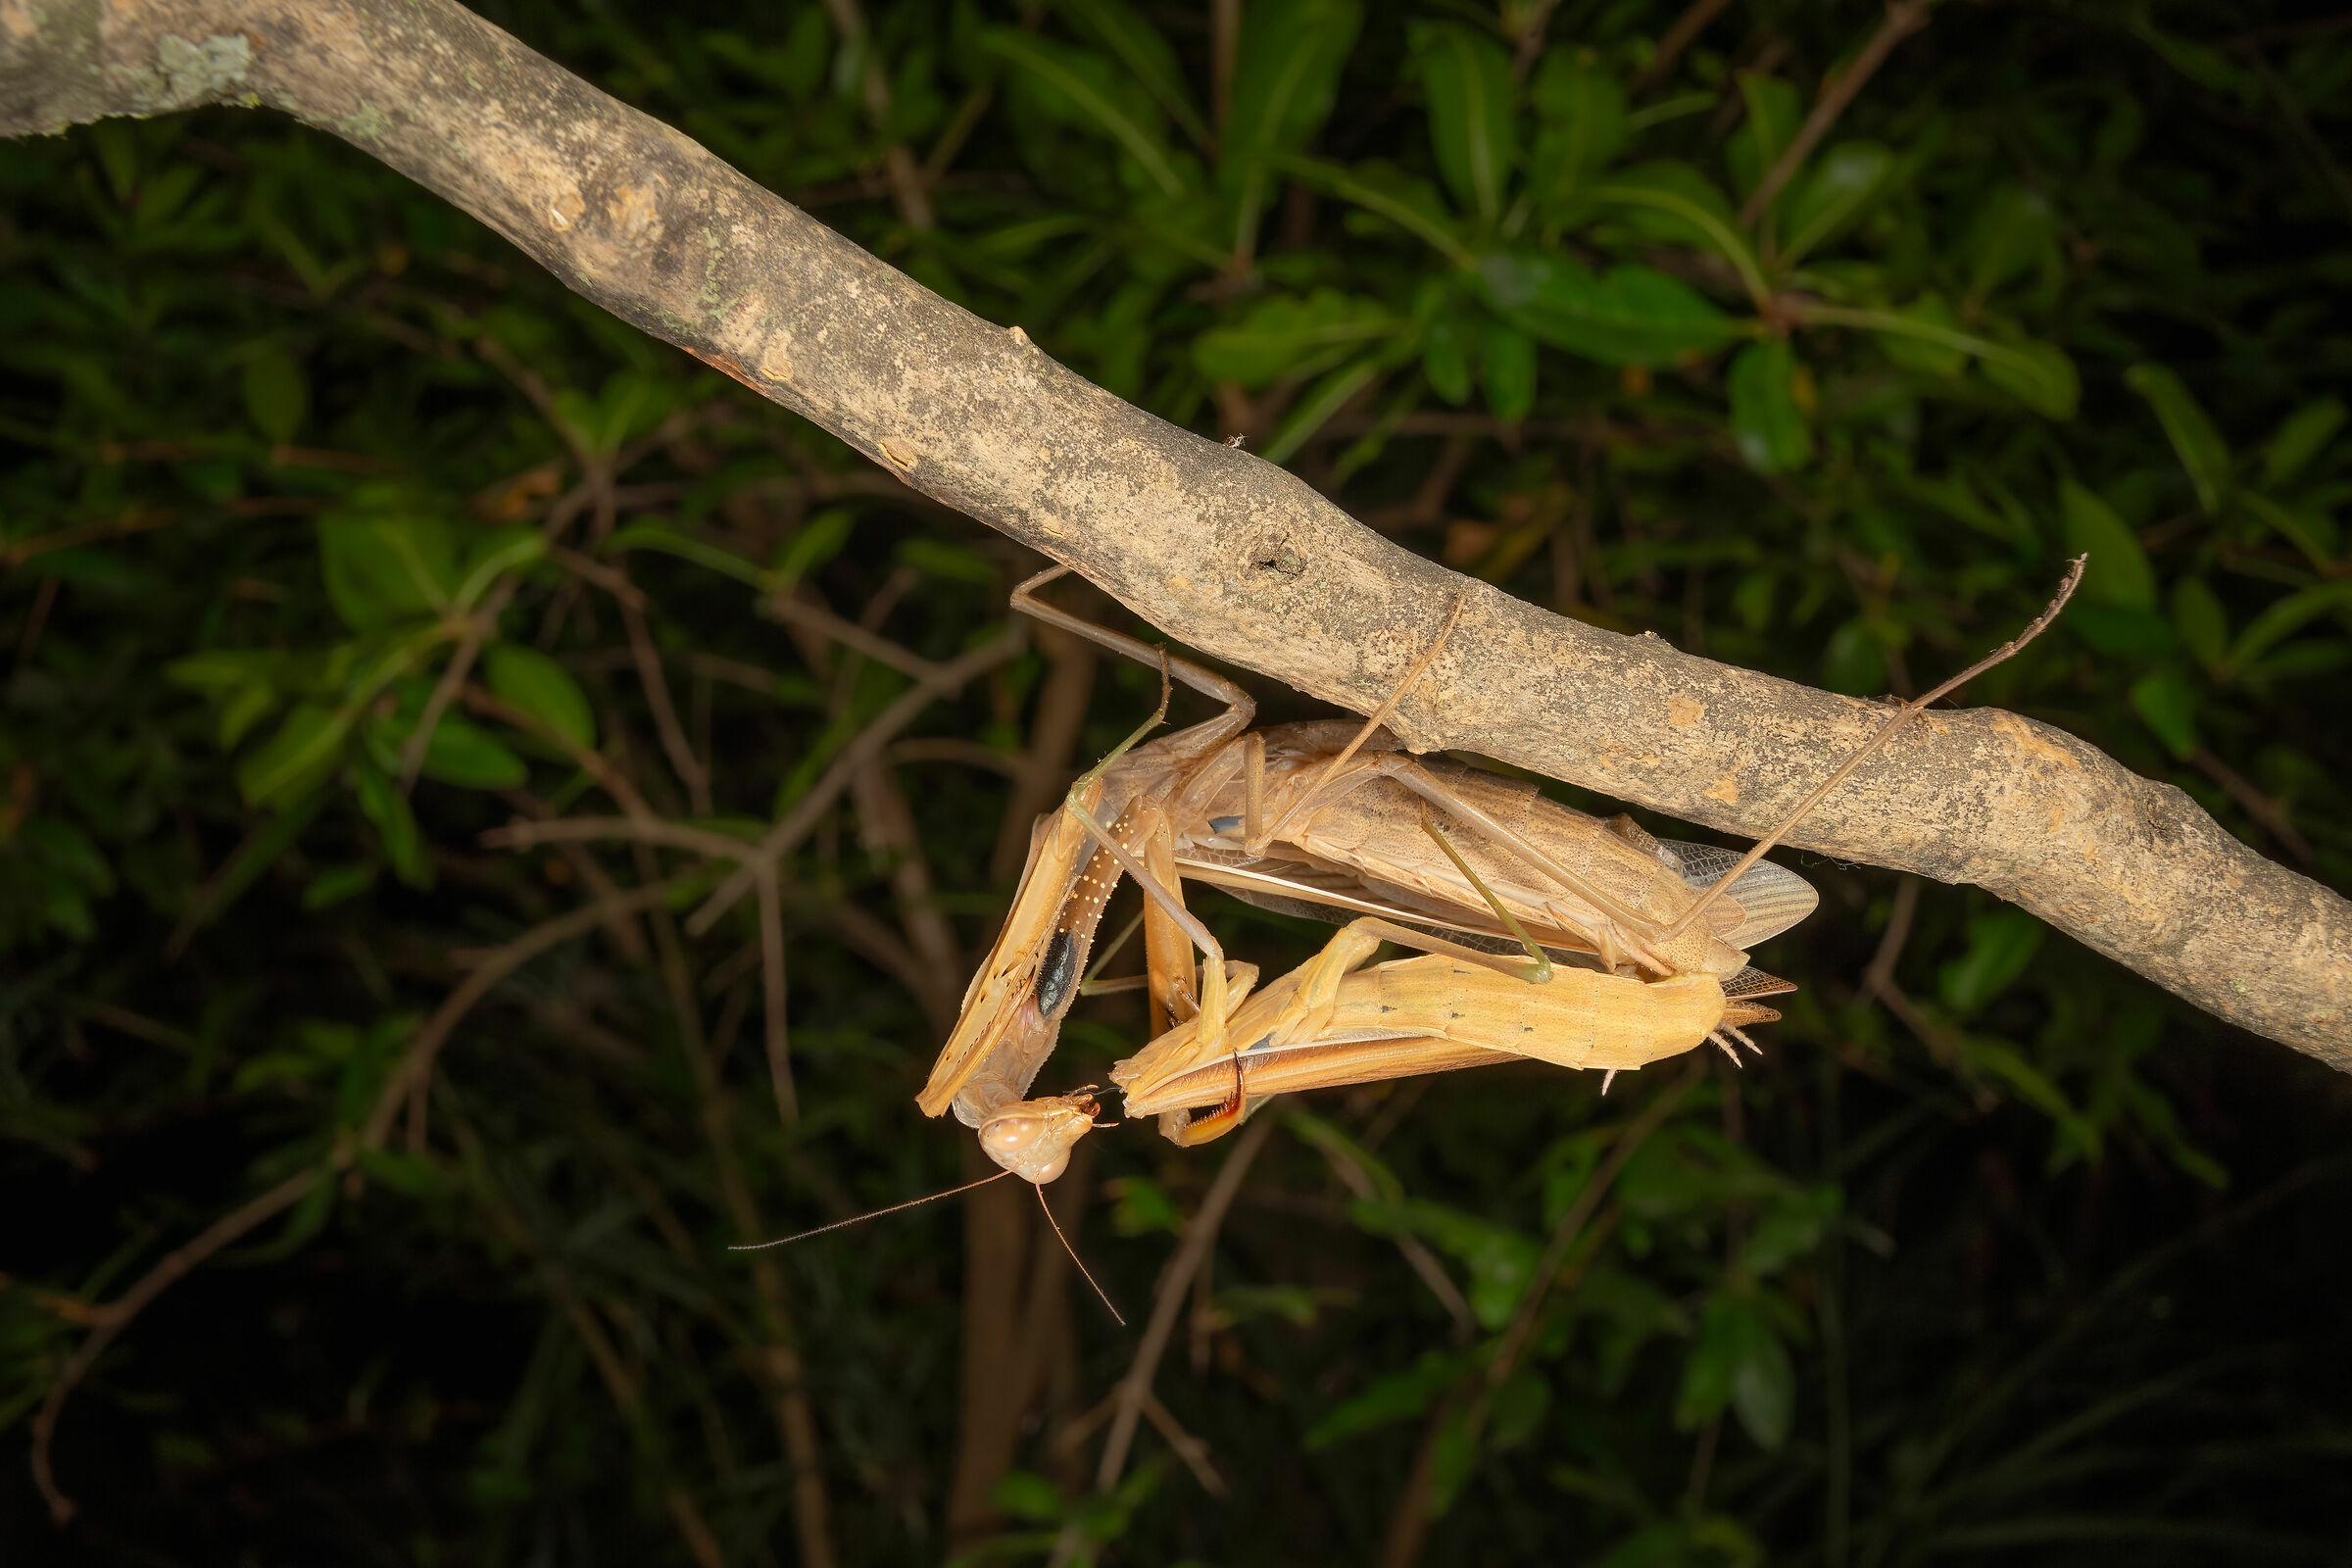 The mating of the mantis, 7...